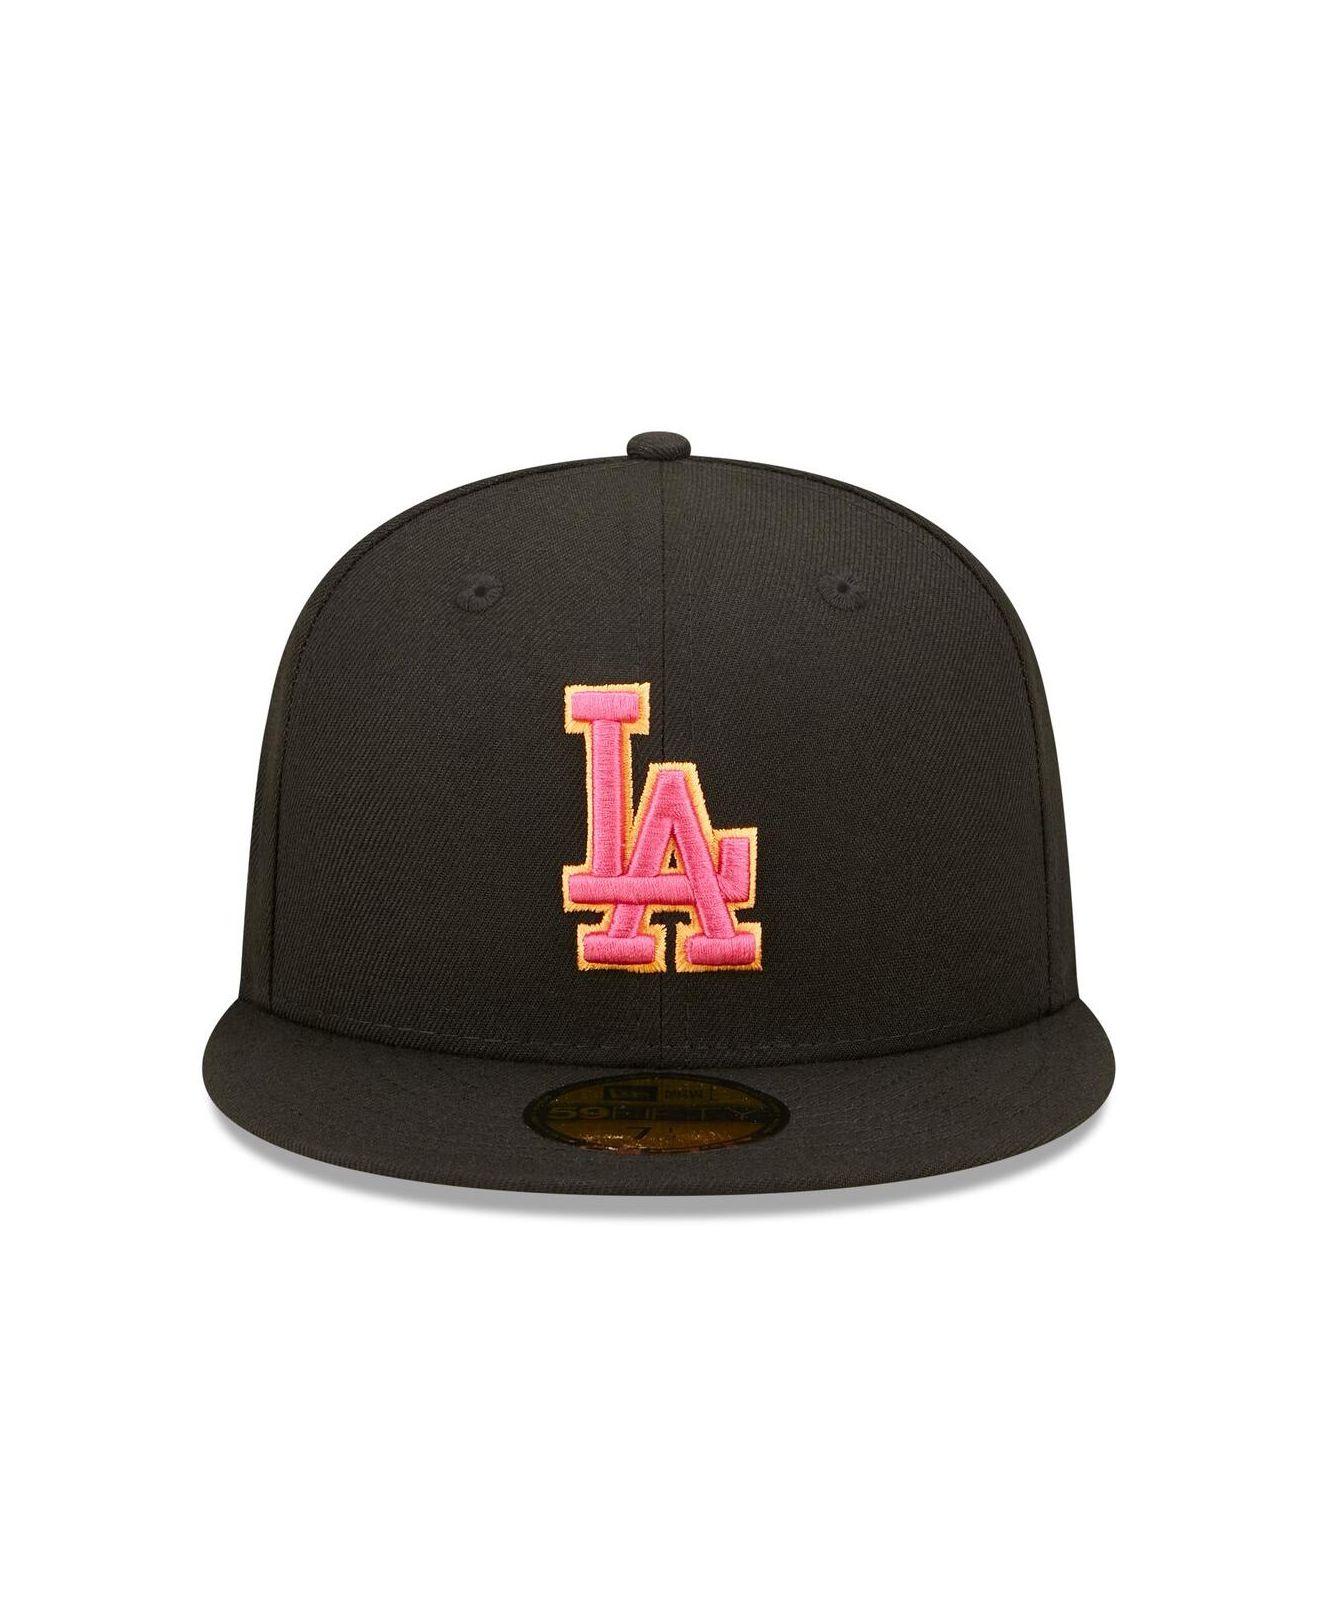 Men's New Era Royal Los Angeles Dodgers Sunlight Pop 59FIFTY Fitted Hat 